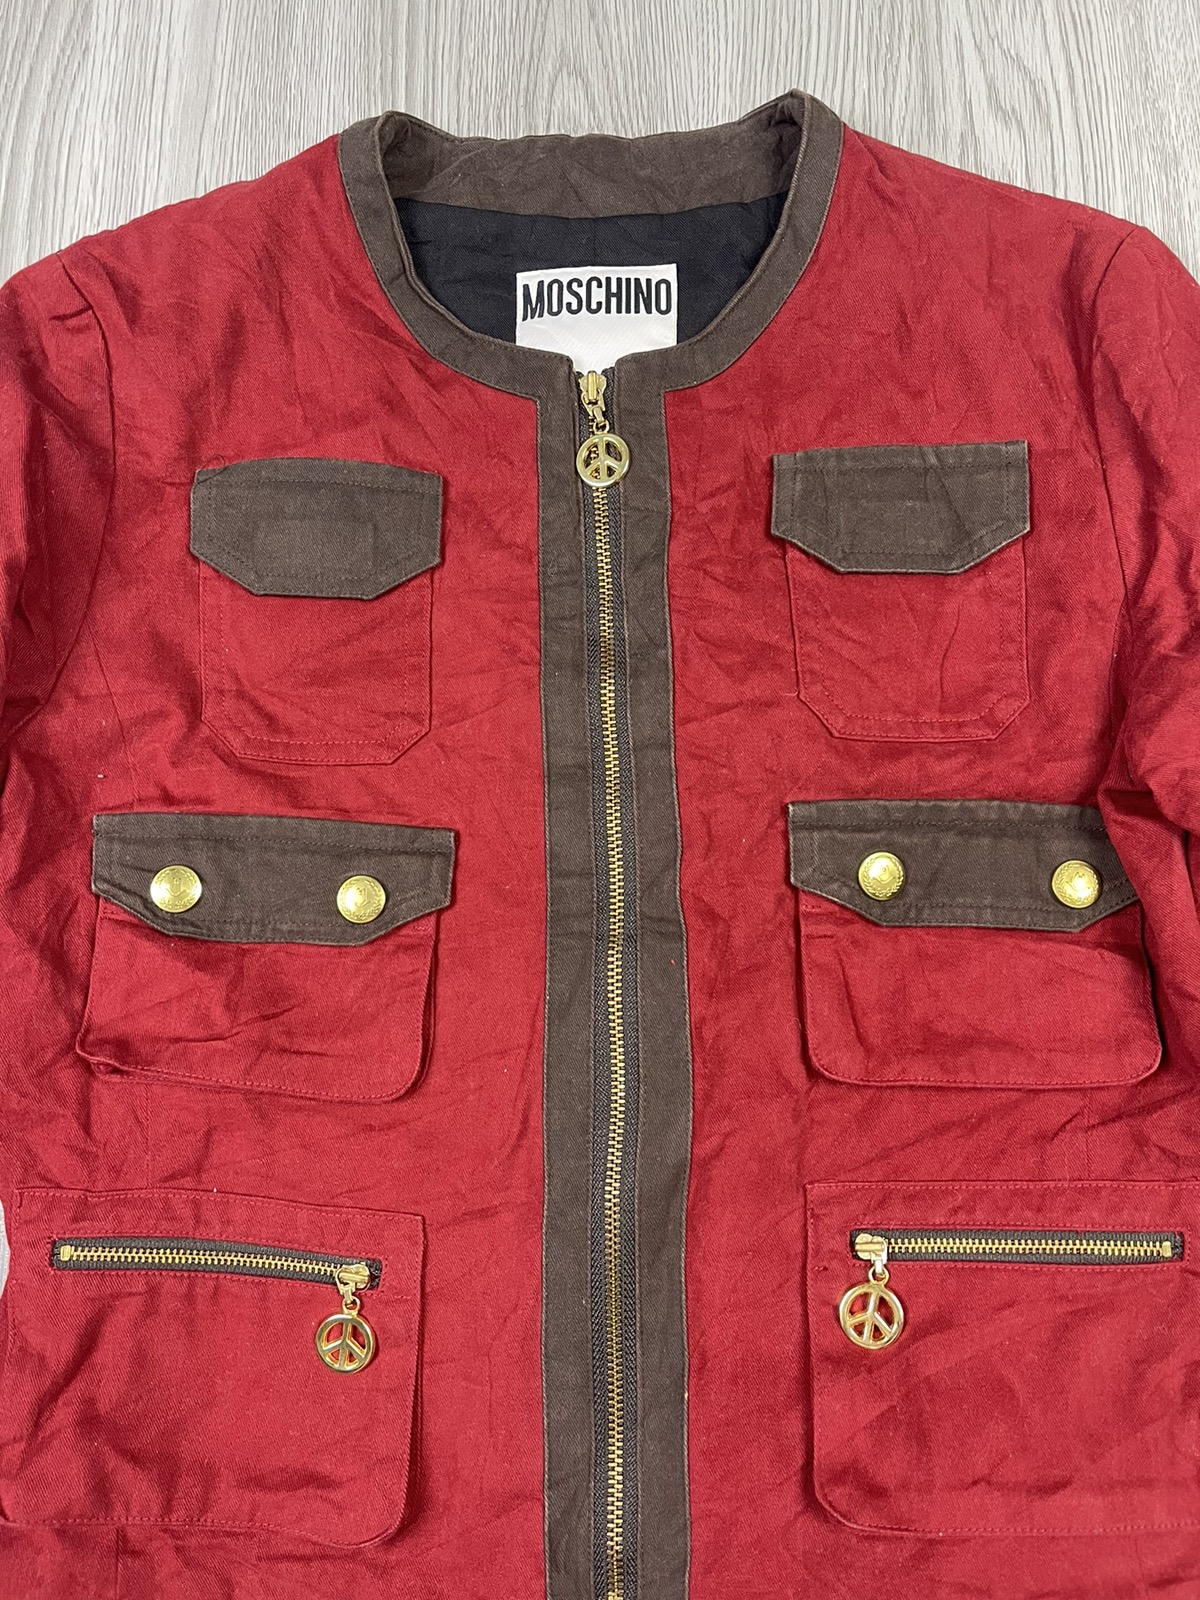 Moschino Multipocket Gold peace zipper Red Jacket - 6